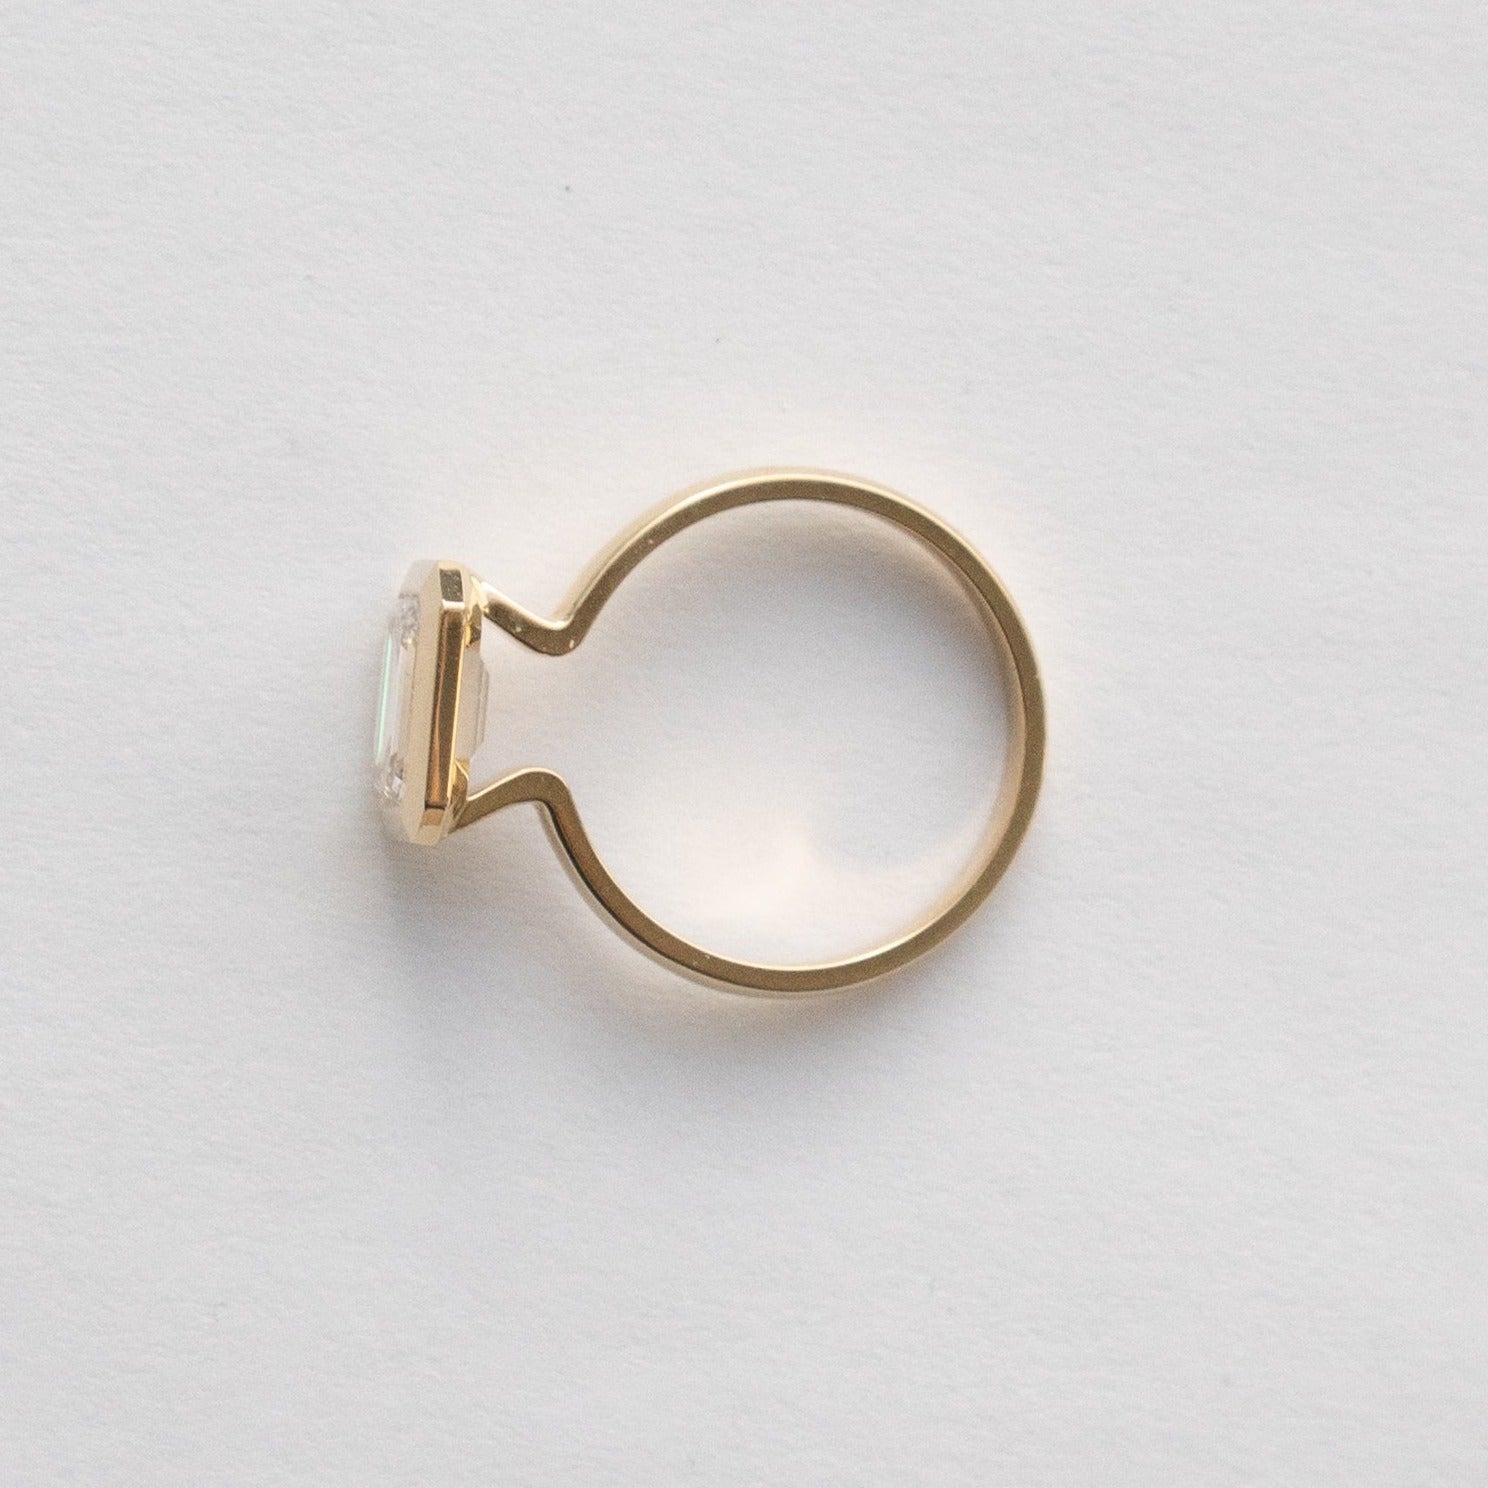 Alternative Vilke Ring in 14k Yellow Gold With 1.02ct Lab-grown Diamond made in New York City by SHW fine Jewelry